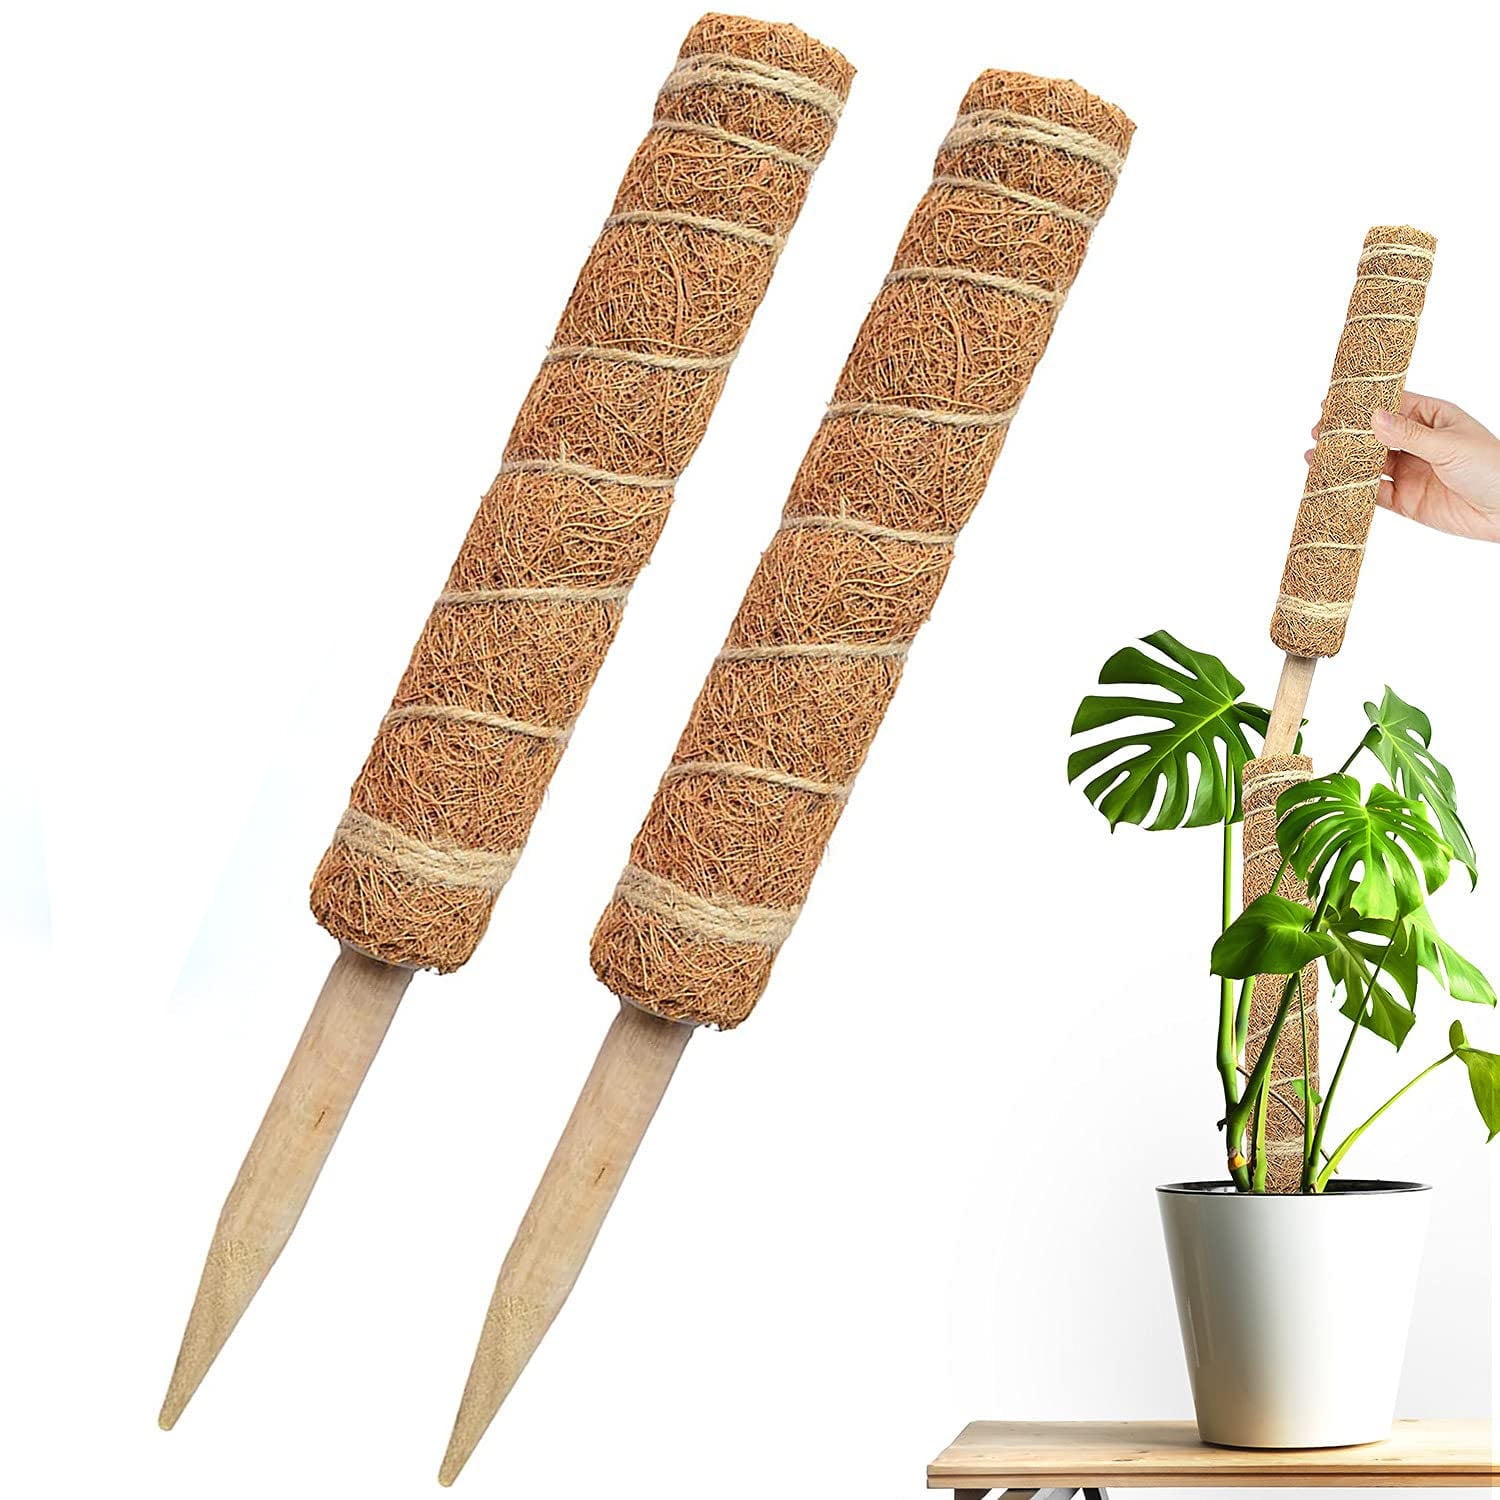 with 50 Reusable Ties 2 Coco Coconut Fibre Plant Poles Extend to 26.4 inches Suitable for Indoor Plant Support Train Indoor Plants to Grow Upwards. Moss Pole 